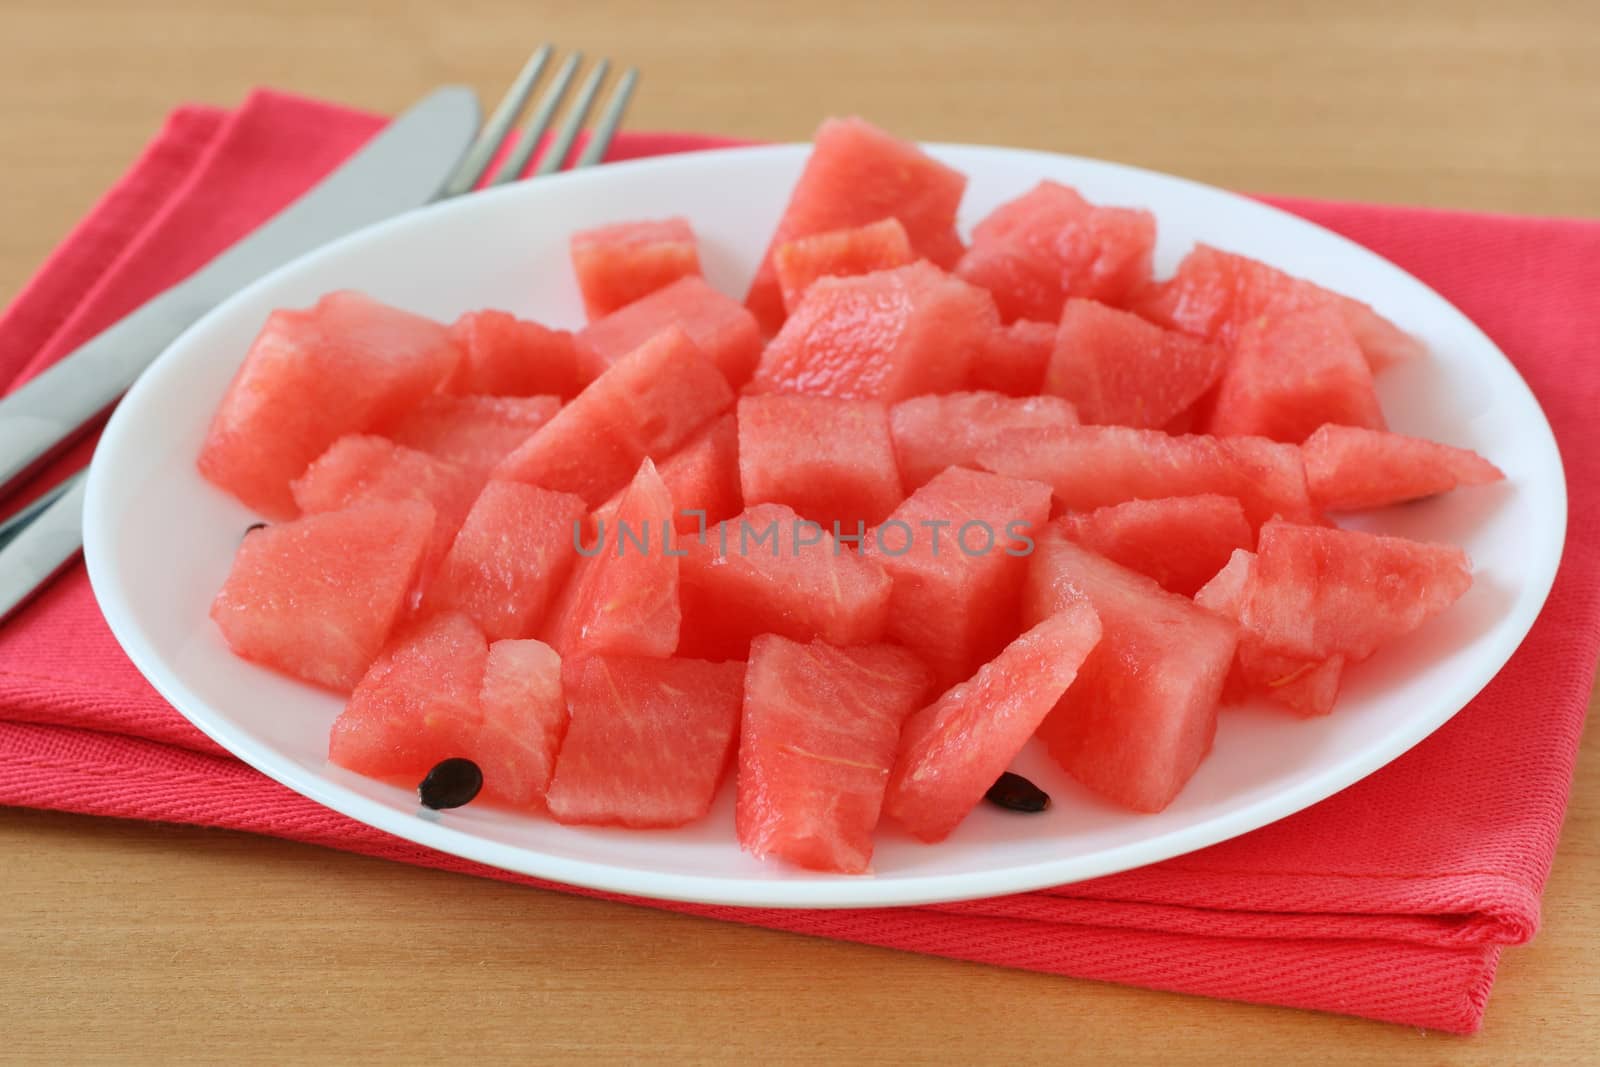 watermelon on the plate